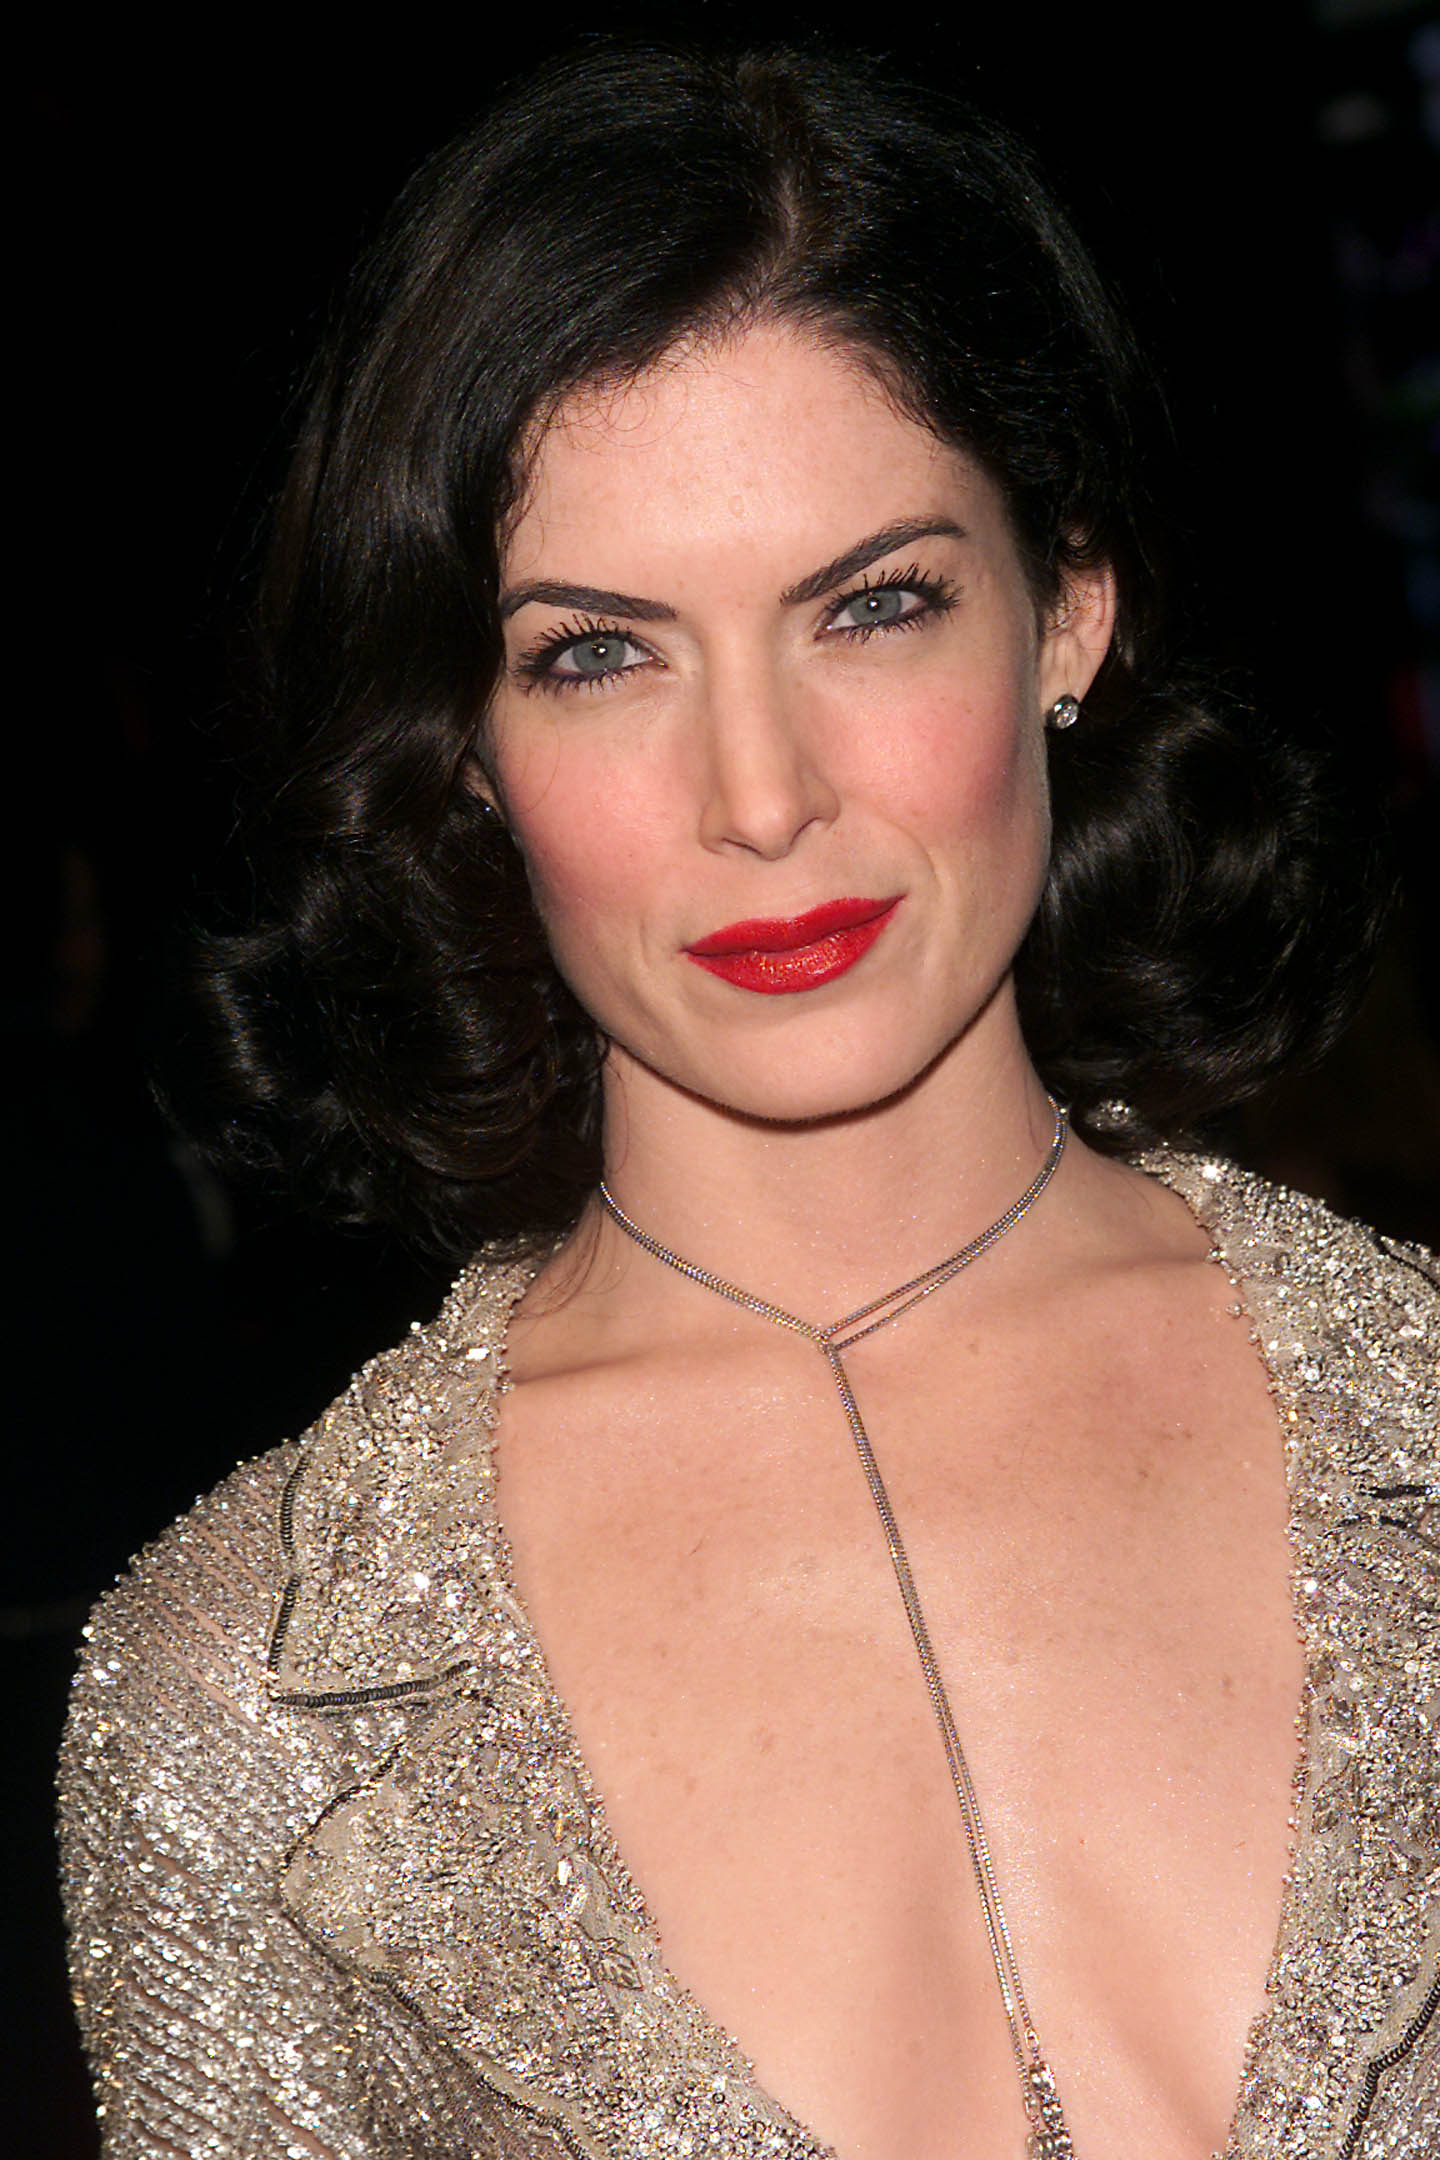 Lara Flynn Boyle attends the Vanity Fair Oscar party on March 25, 2001 | Source: Getty Images